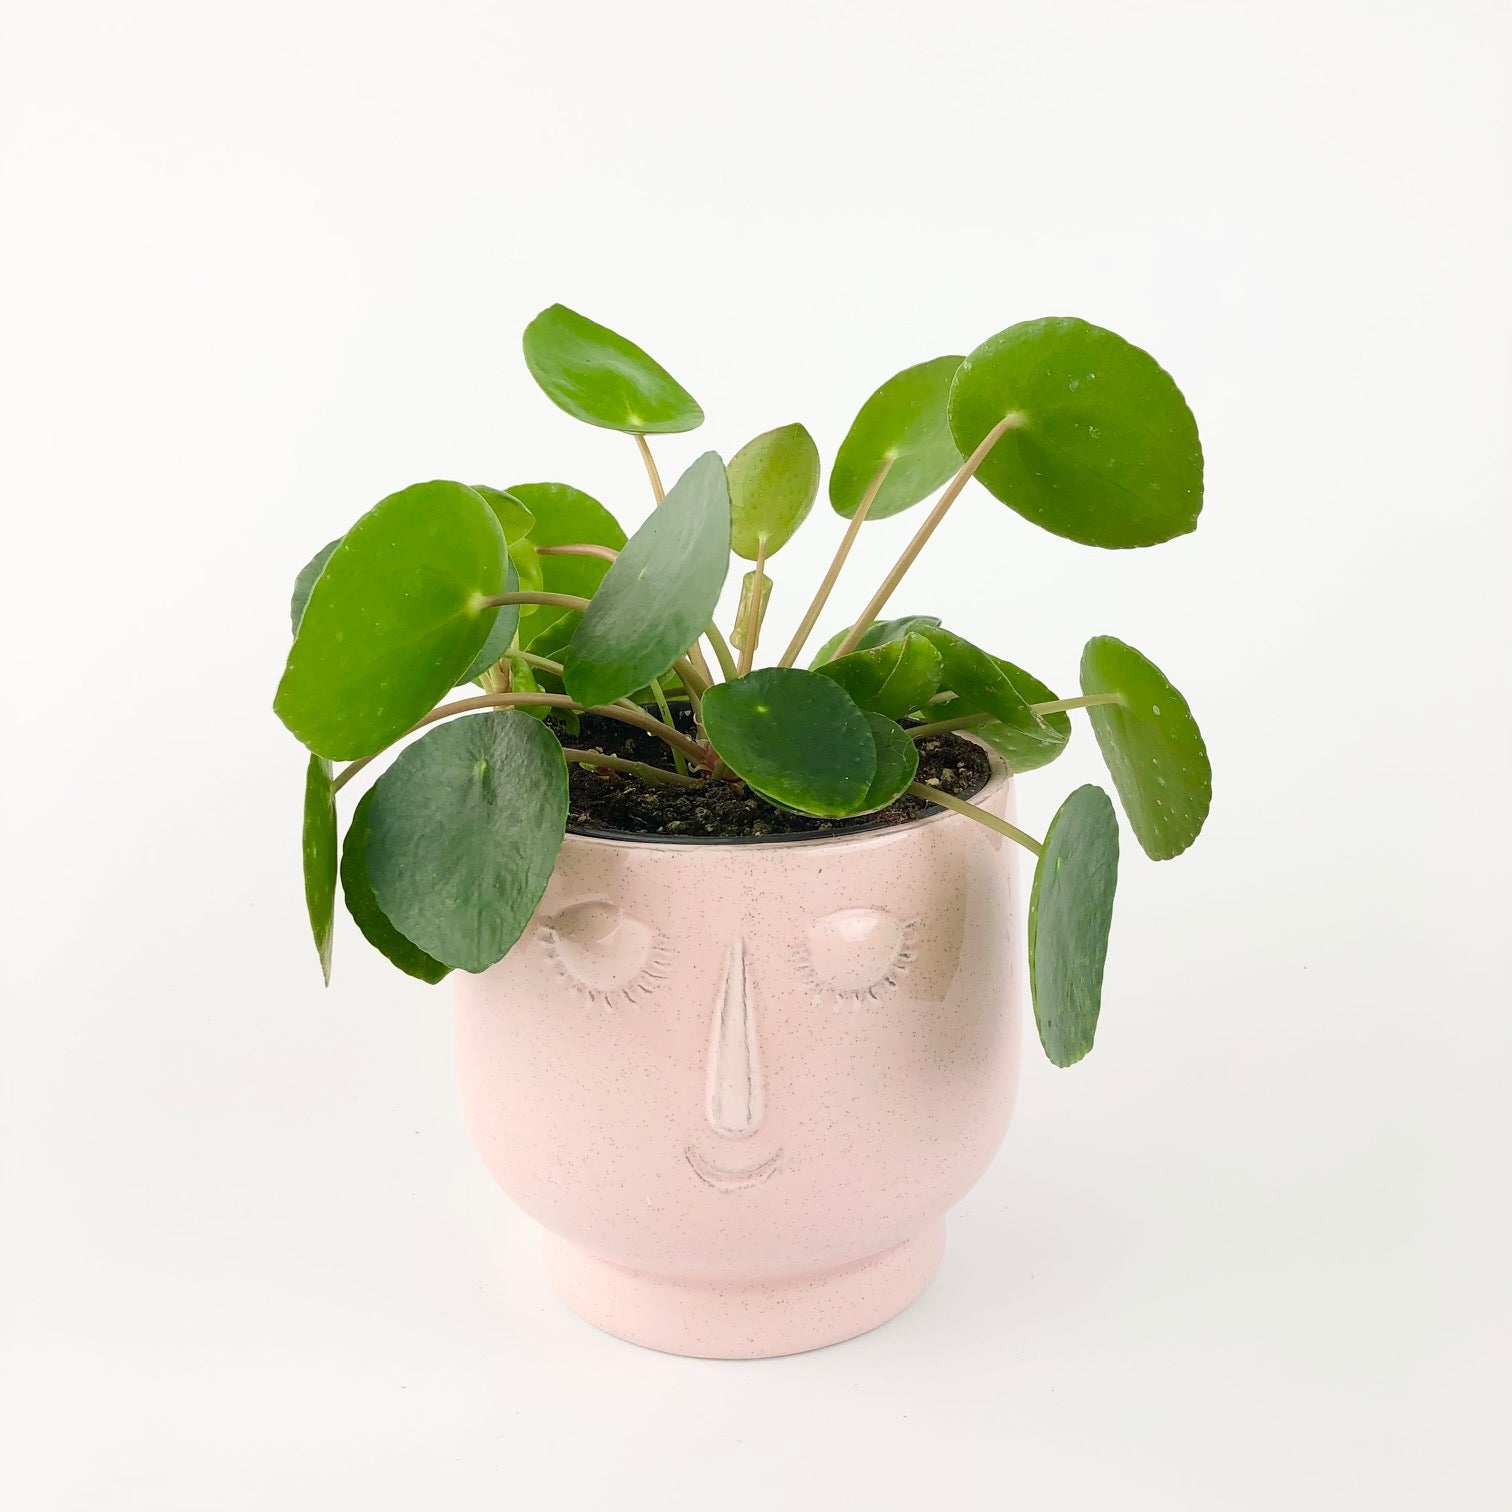 Chinese money plant - Pilea peperomioides